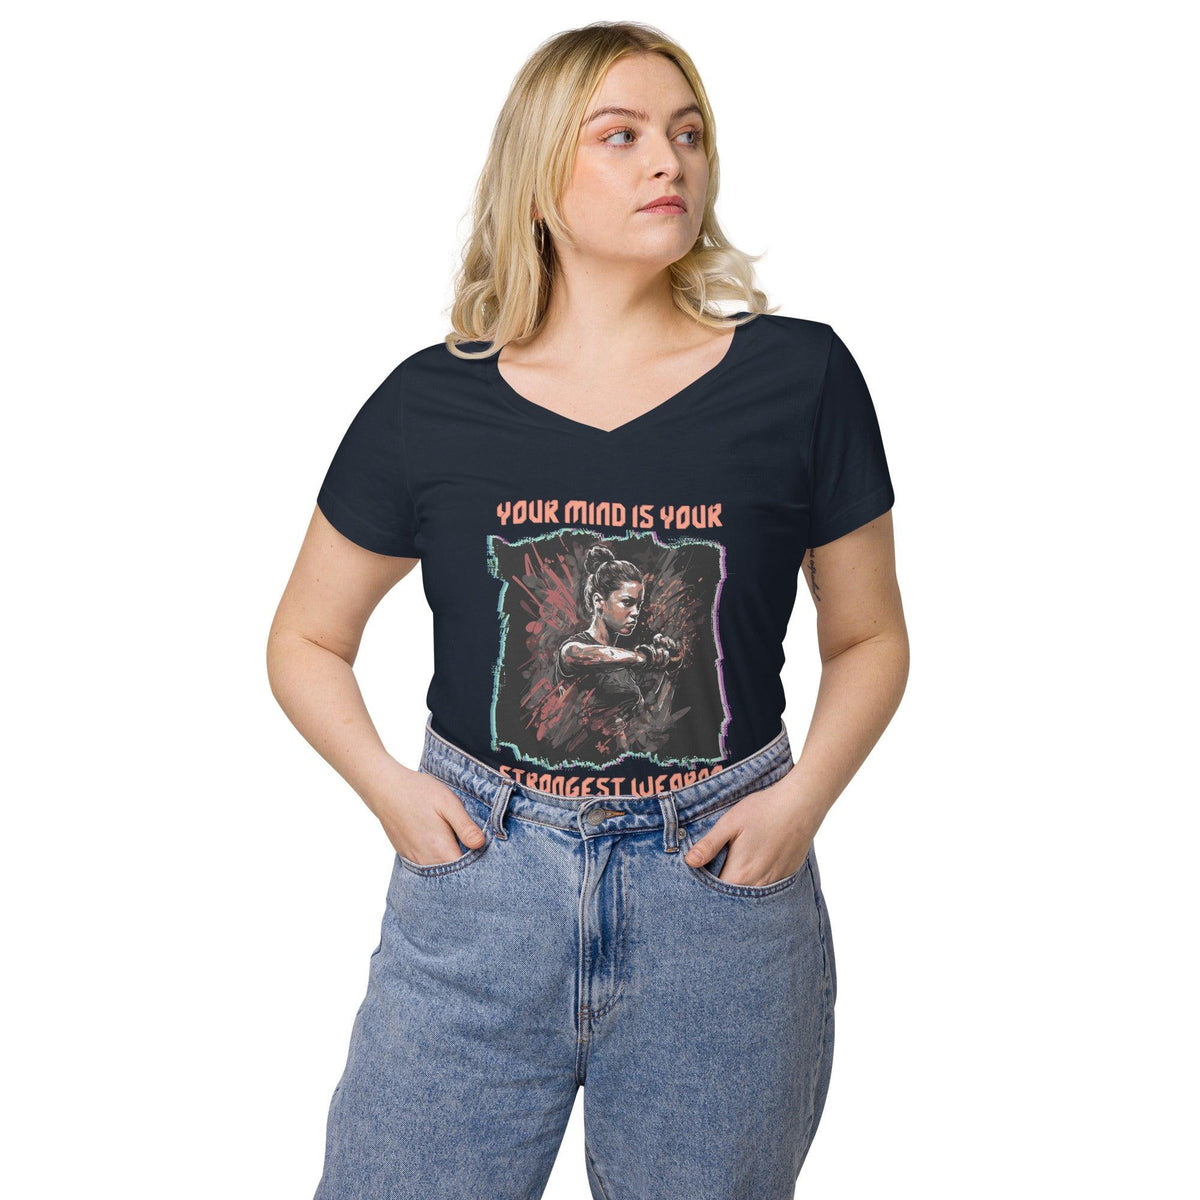 Your Mind Is Your Strongest Weapon Women’s Fitted V-neck T-shirt - Beyond T-shirts